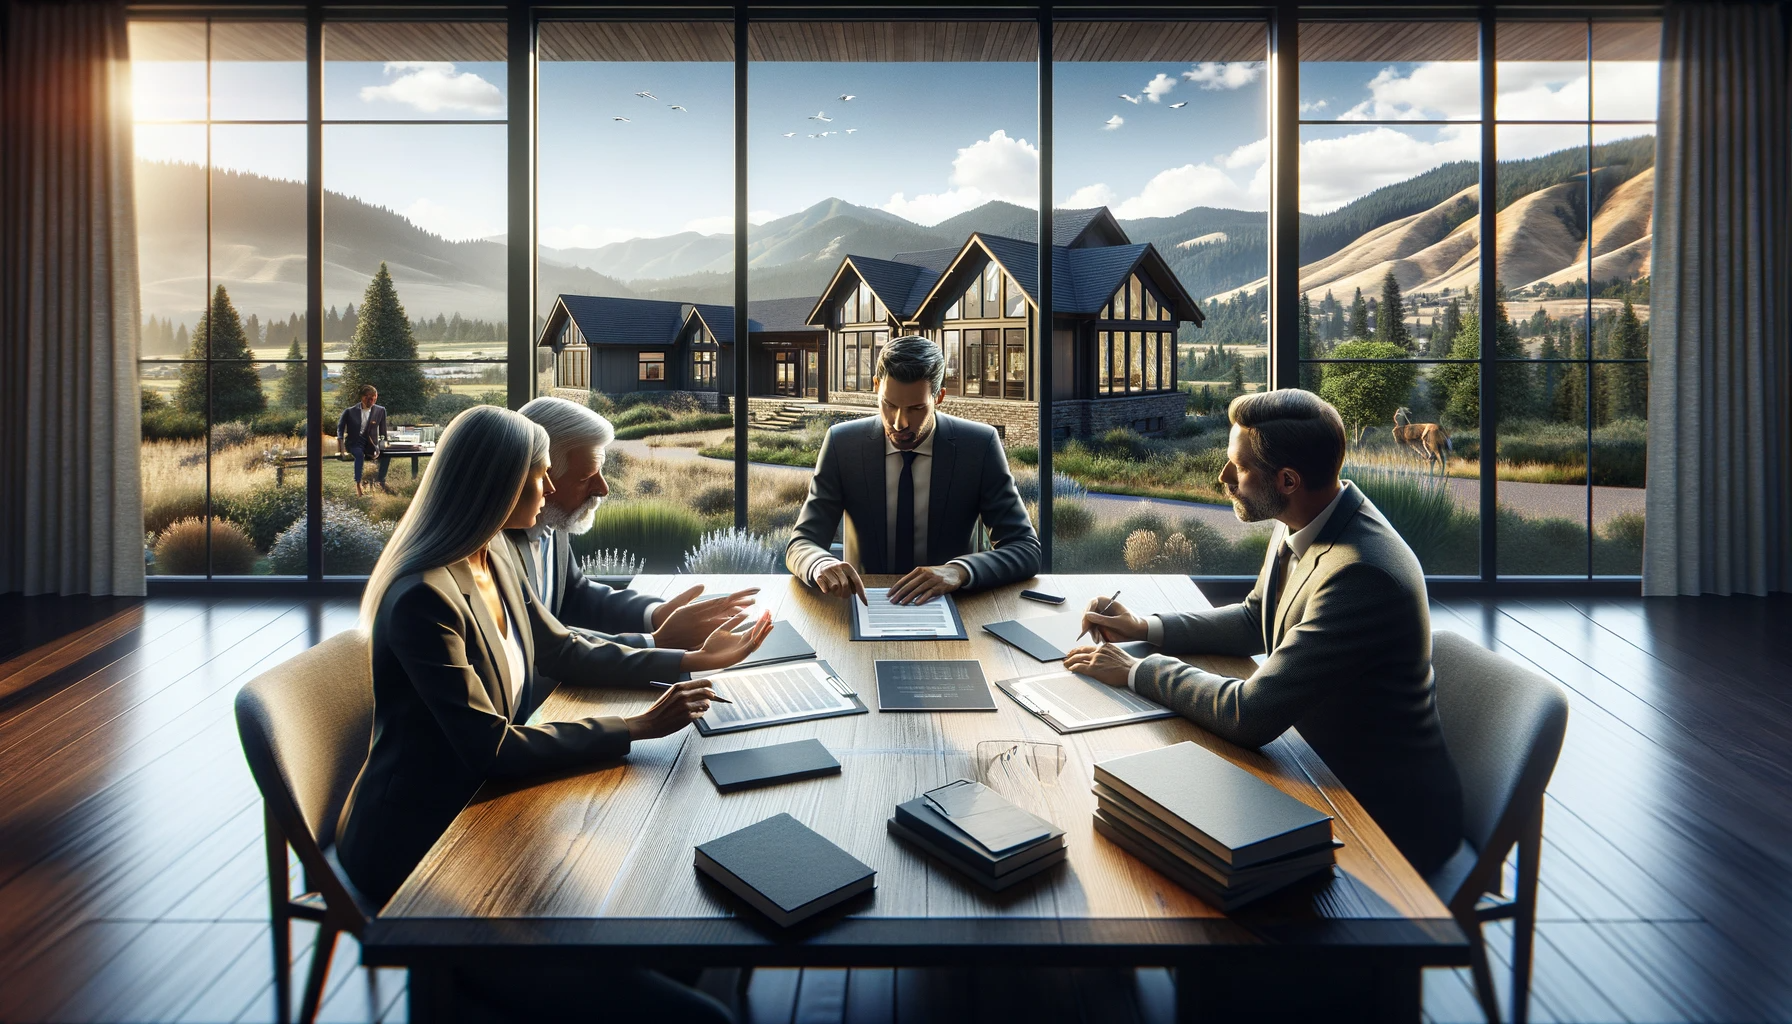 A real estate agent and clients in a focused negotiation session, with the scenic backdrop of Southern Oregon visible through the office window